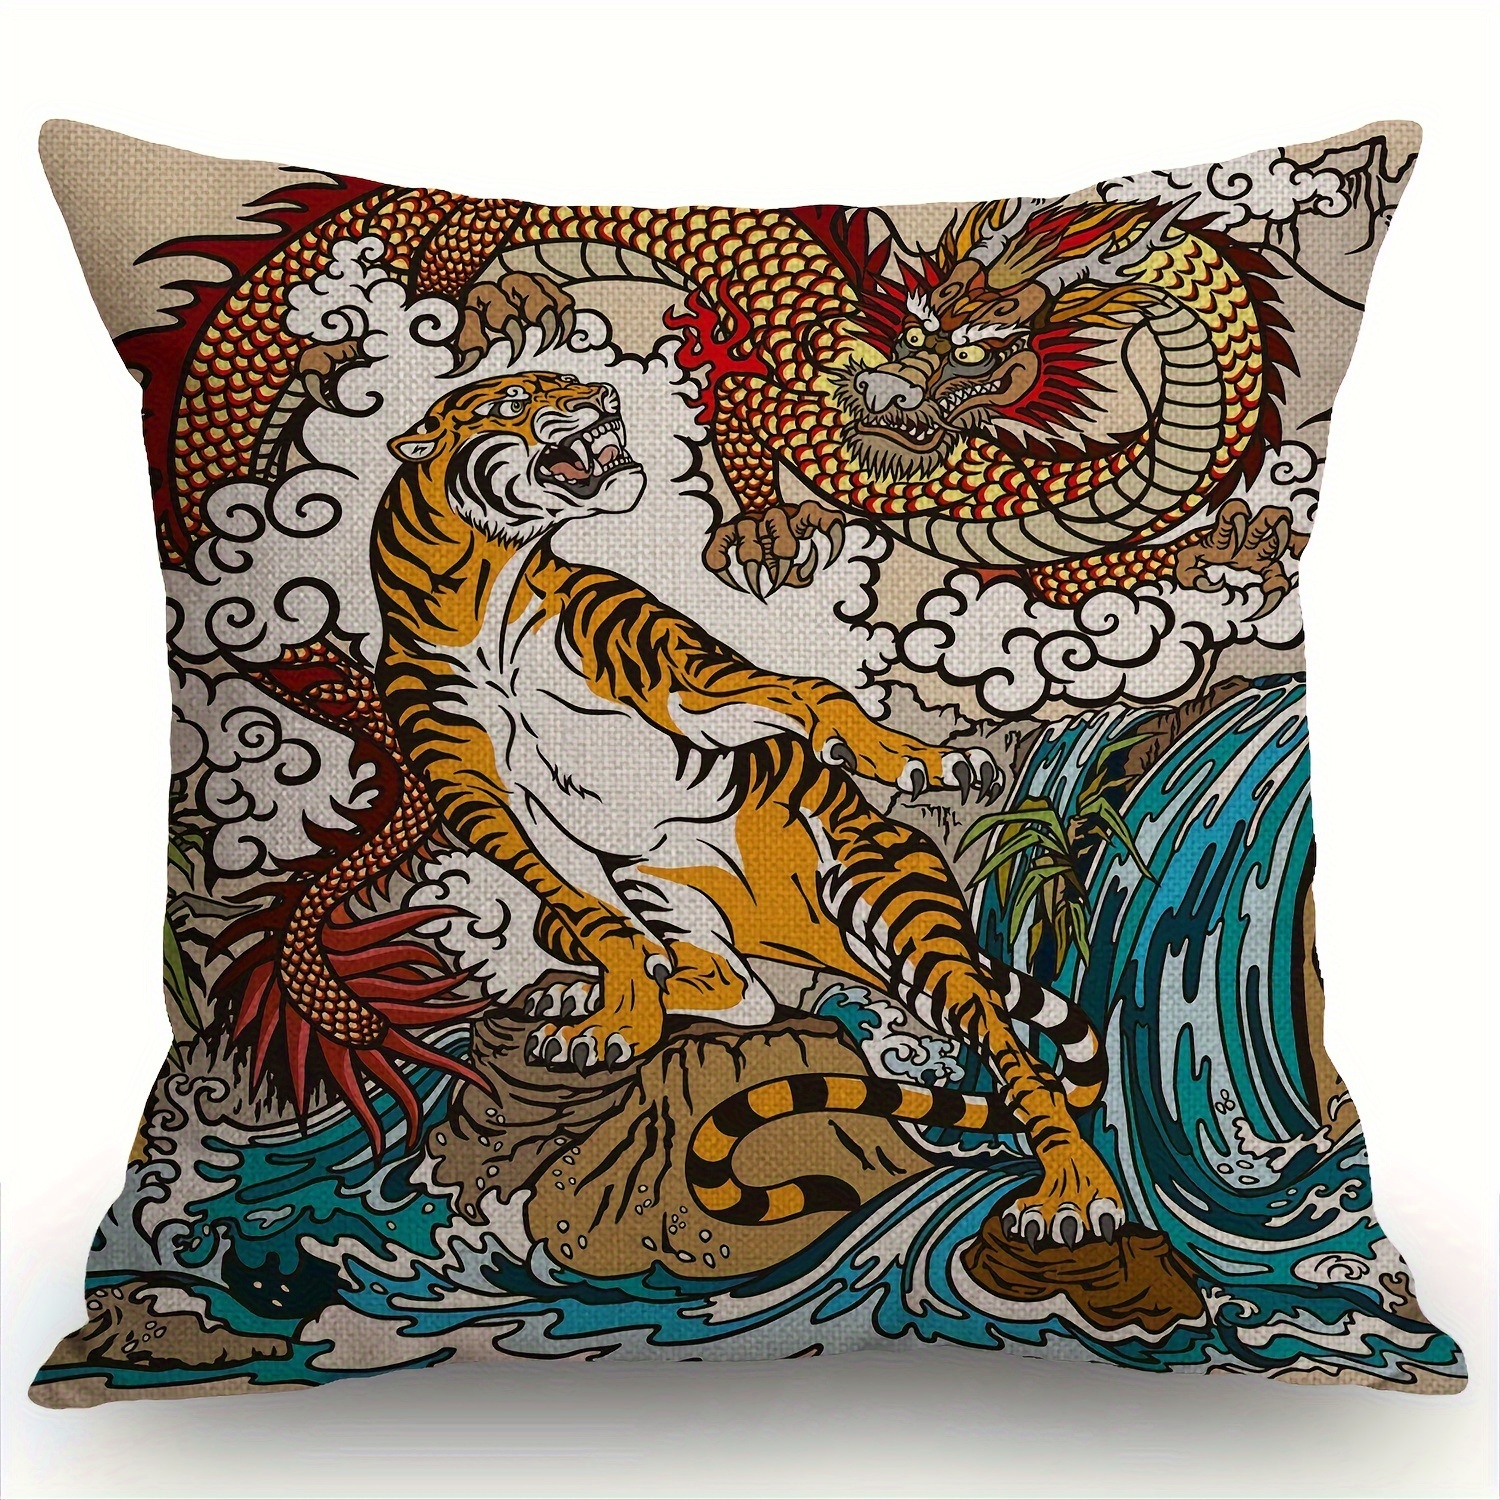 

1pc Chinese Dragon And Tiger In The Landscape With Waterfall Cotton Linen Throw Pillow Case Cushion Cover Home Office Decorative For Sofa Living Room Square, 18x18 Inches